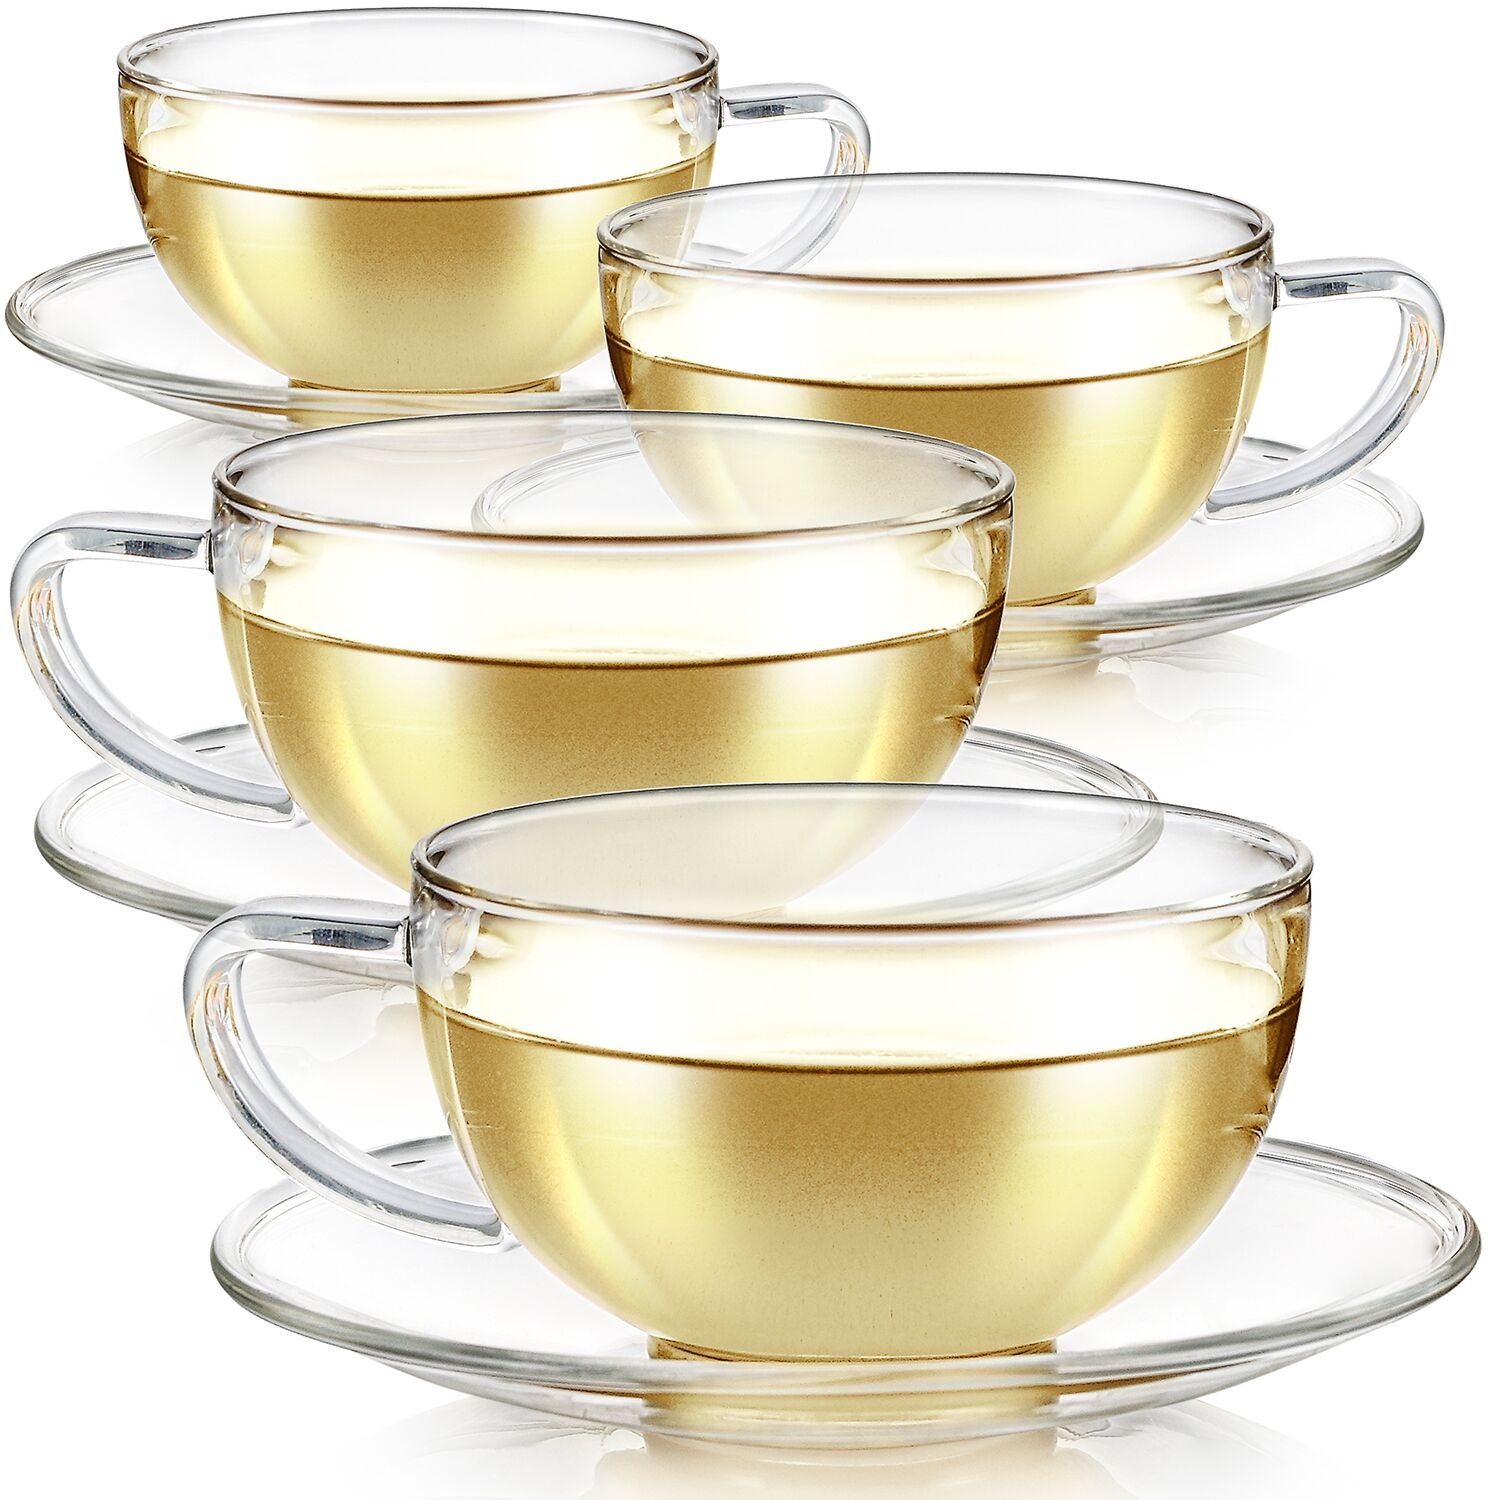 Teabloom borosilicate glass Kyoto Cup and Saucer Set tea accessories